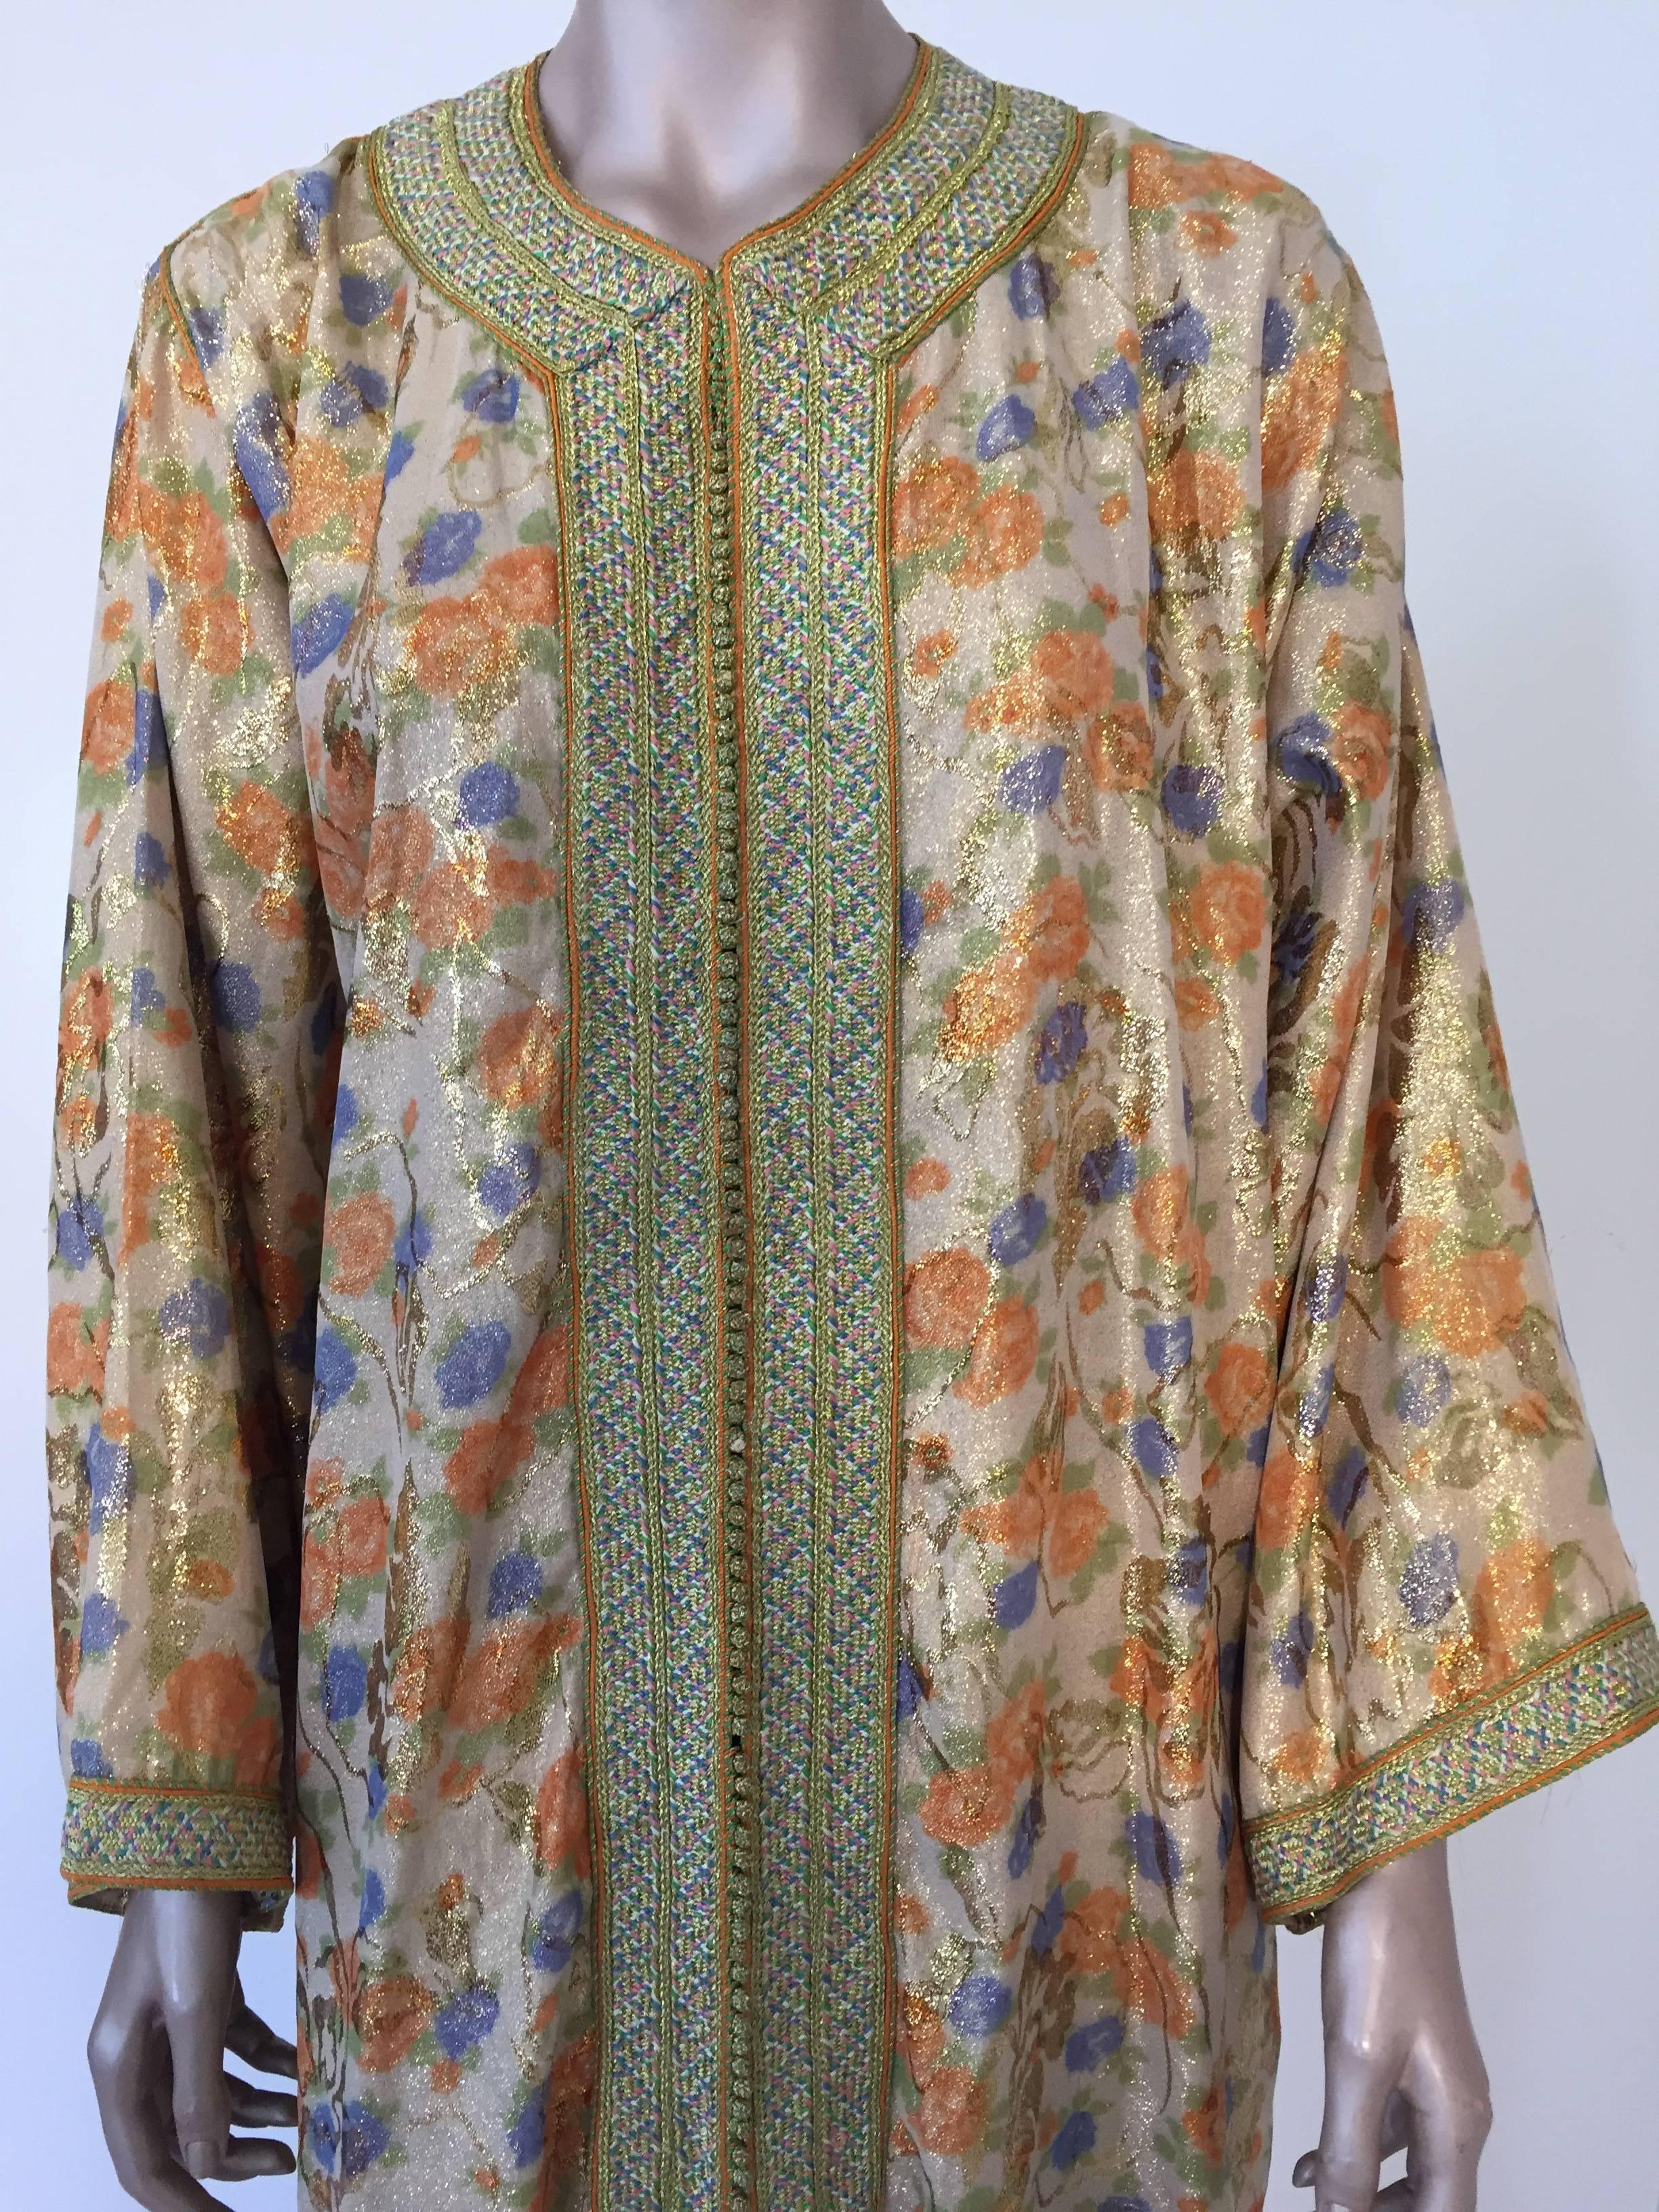 Moroccan Brocade Floral Kaftan Gown Maxi Dress In Good Condition For Sale In North Hollywood, CA